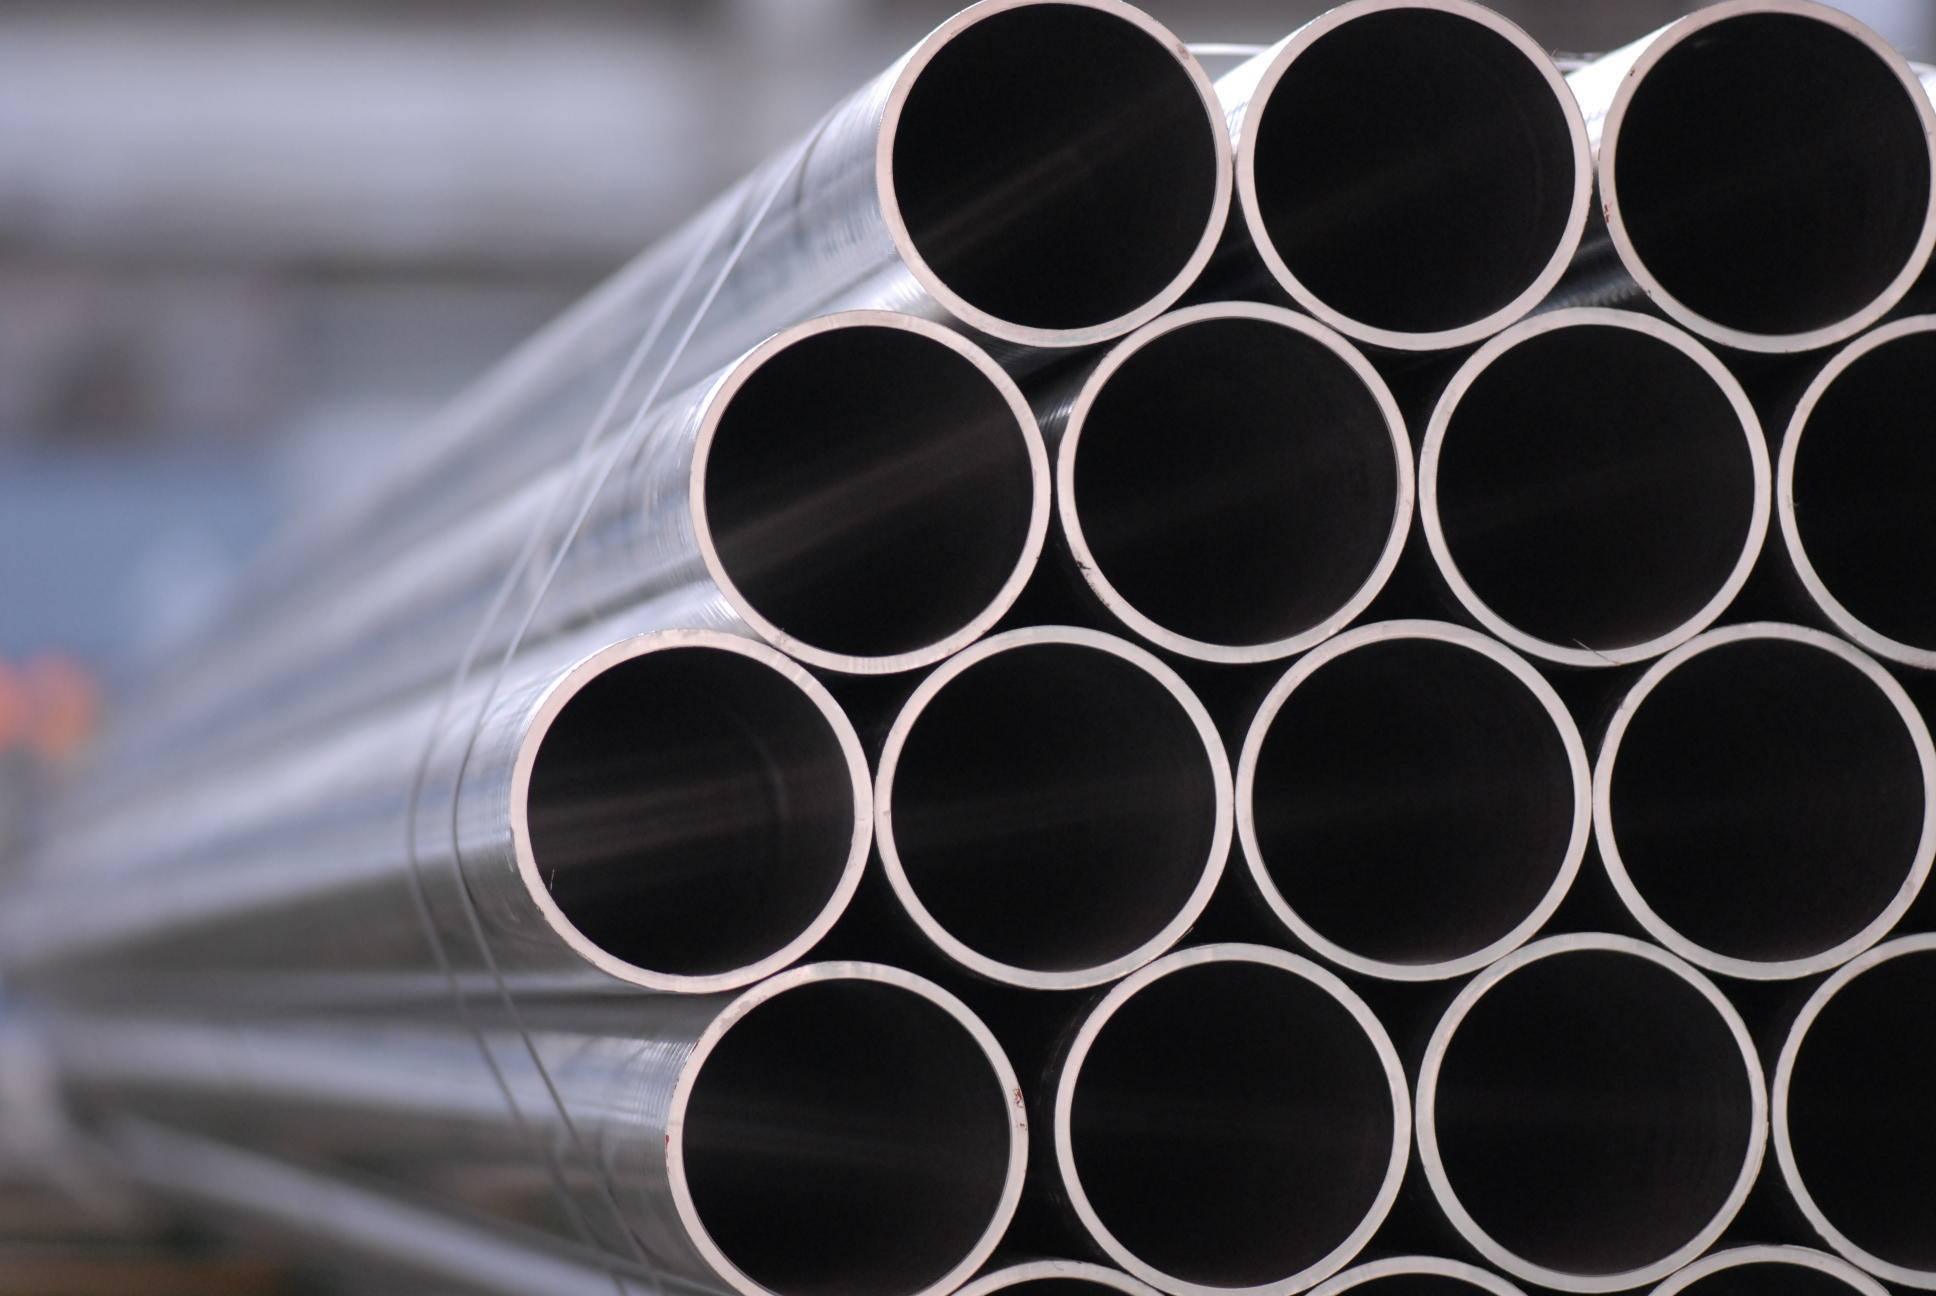 Pipes manufactured by Centravis